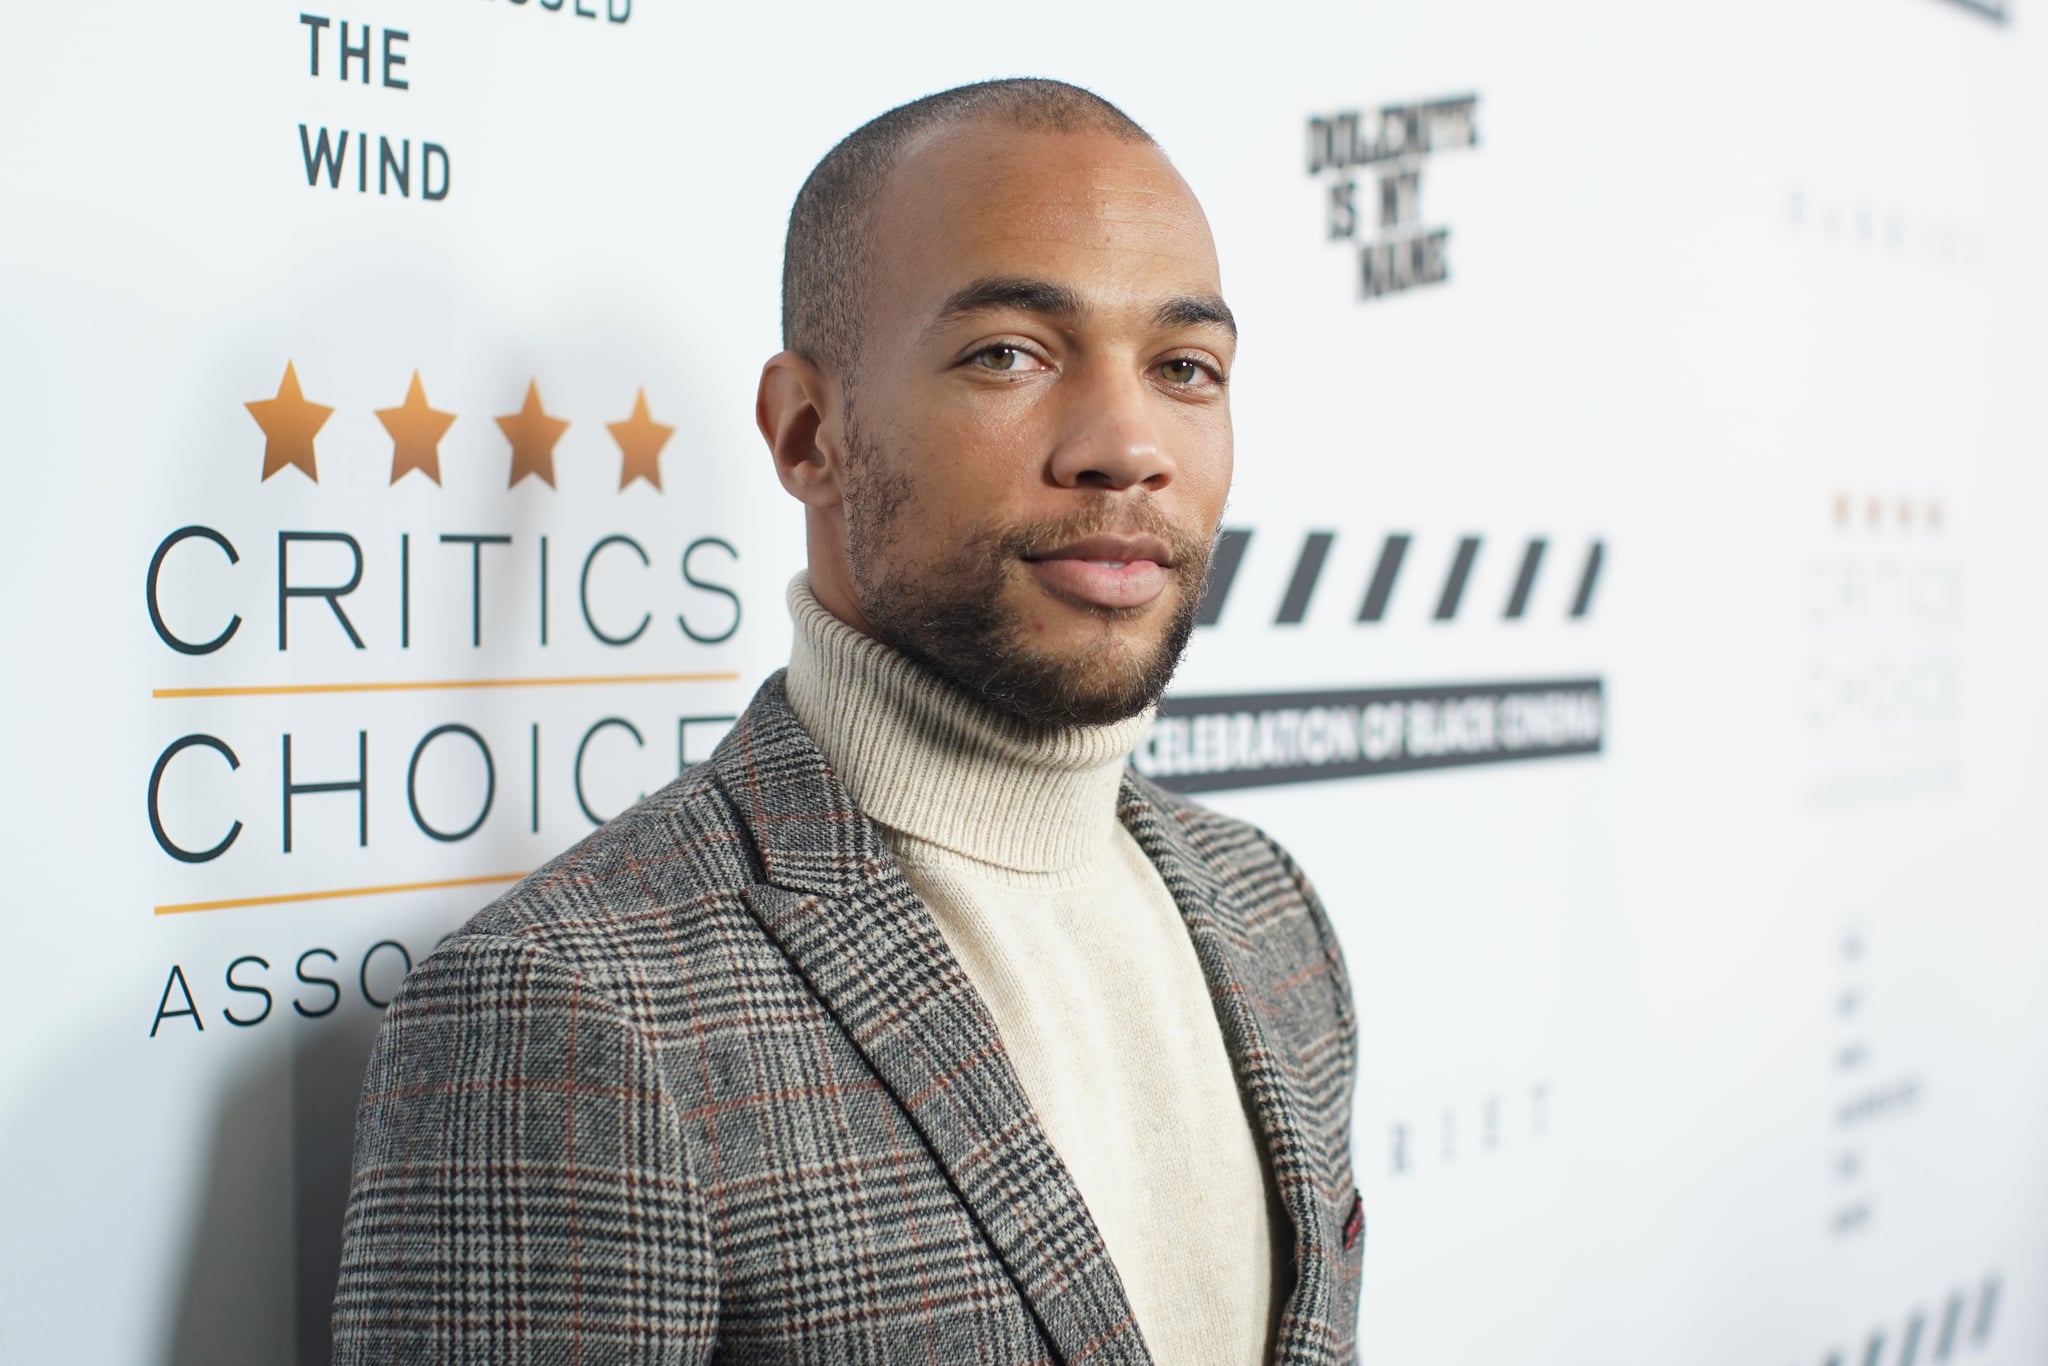 LOS ANGELES, CALIFORNIA - DECEMBER 02: Kendrick Sampson attends the Celebration of Black Cinema at Landmark Annex on December 02, 2019 in Los Angeles, California. (Photo by Randy Shropshire/Getty Images for the Celebration of Black Cinema)